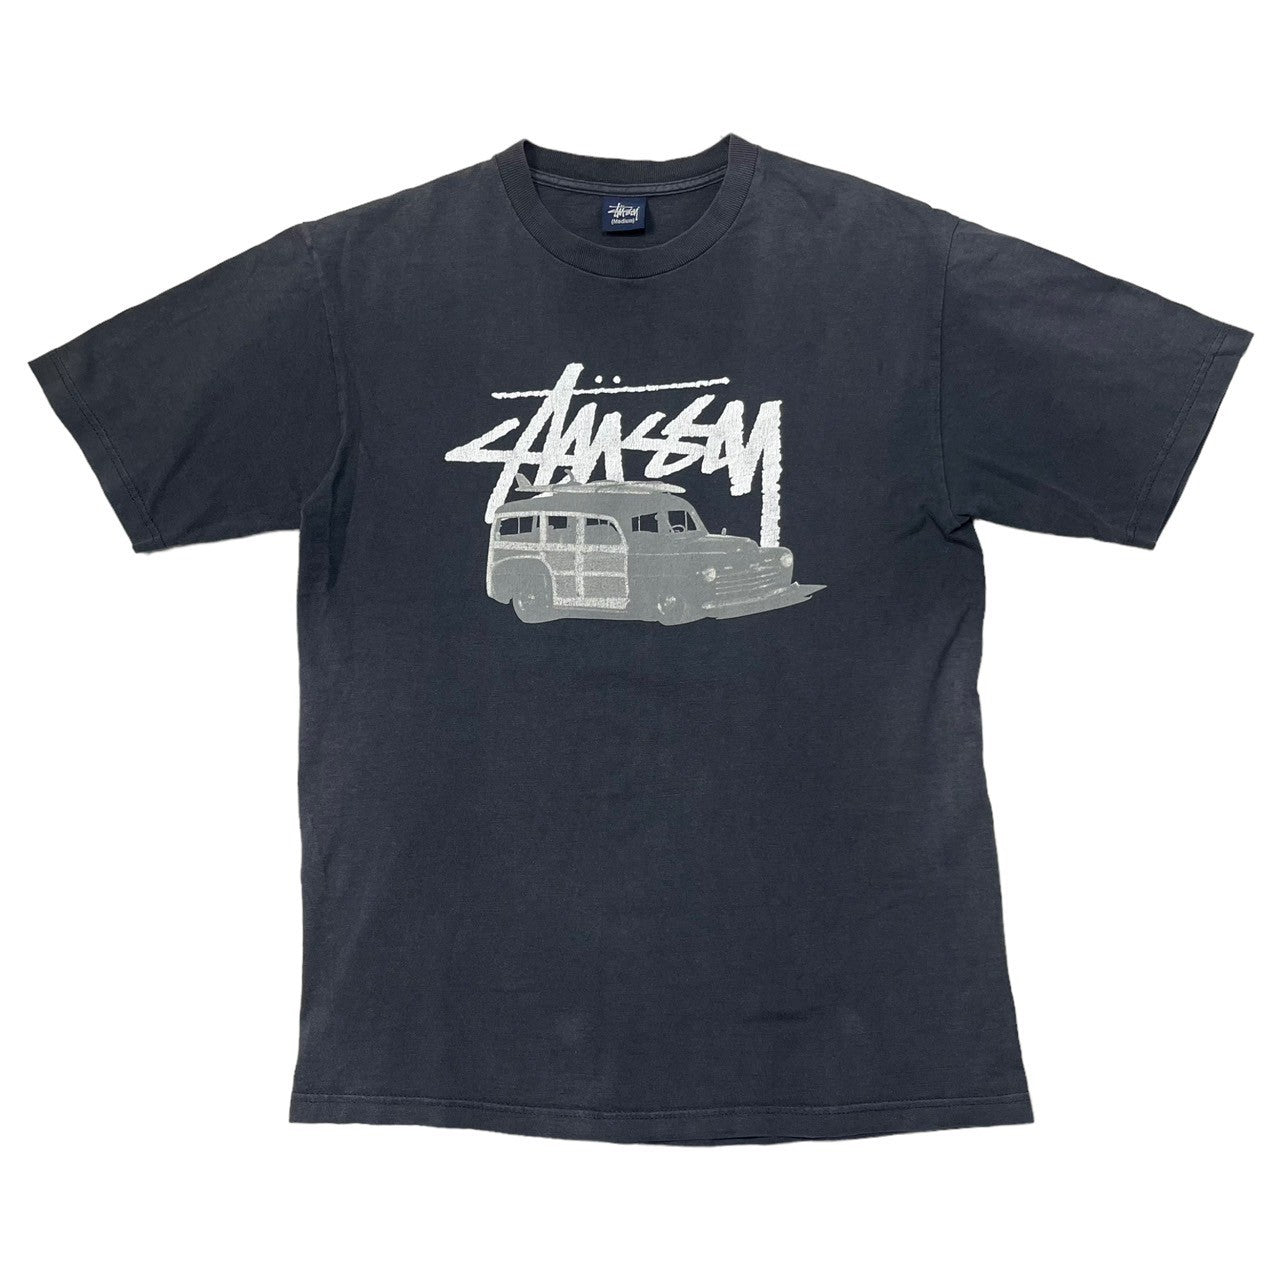 STUSSY(ステューシー) 90's~00's car loaded with surfboards Tシャツ サーフボード 車 紺タグ SIZE M ブラック OLD STUSSY